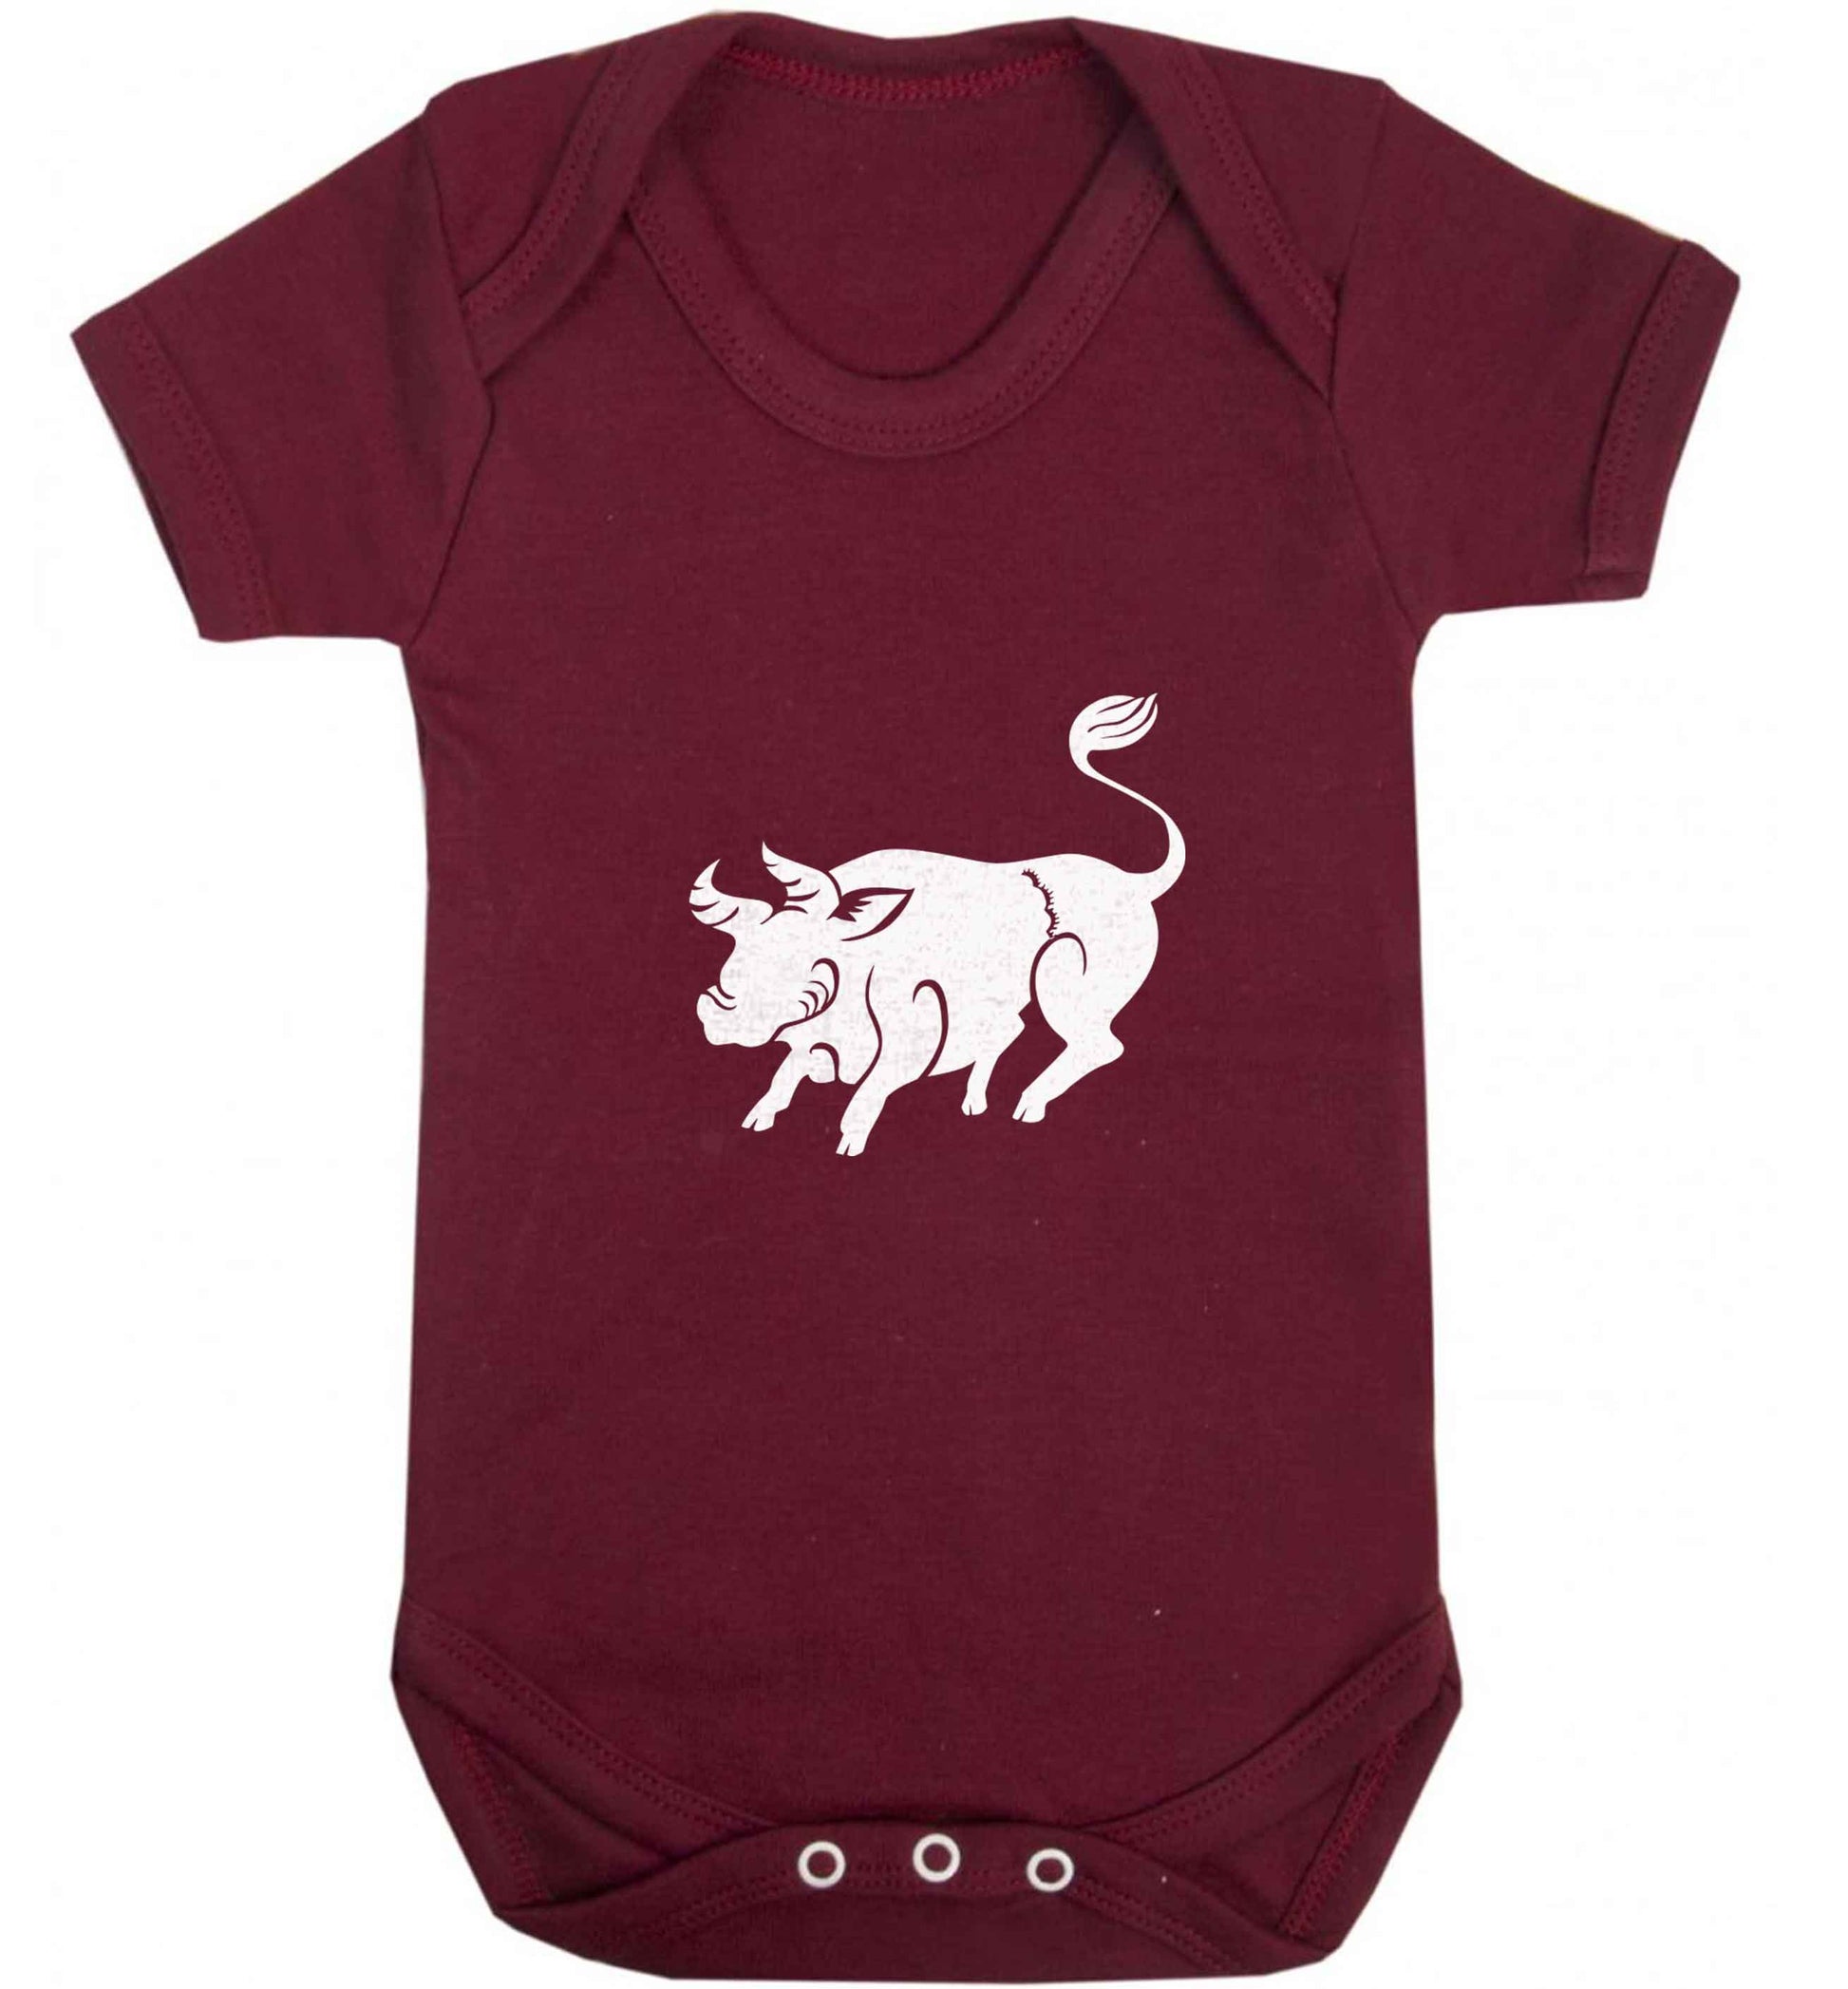 Pig face baby vest maroon 18-24 months